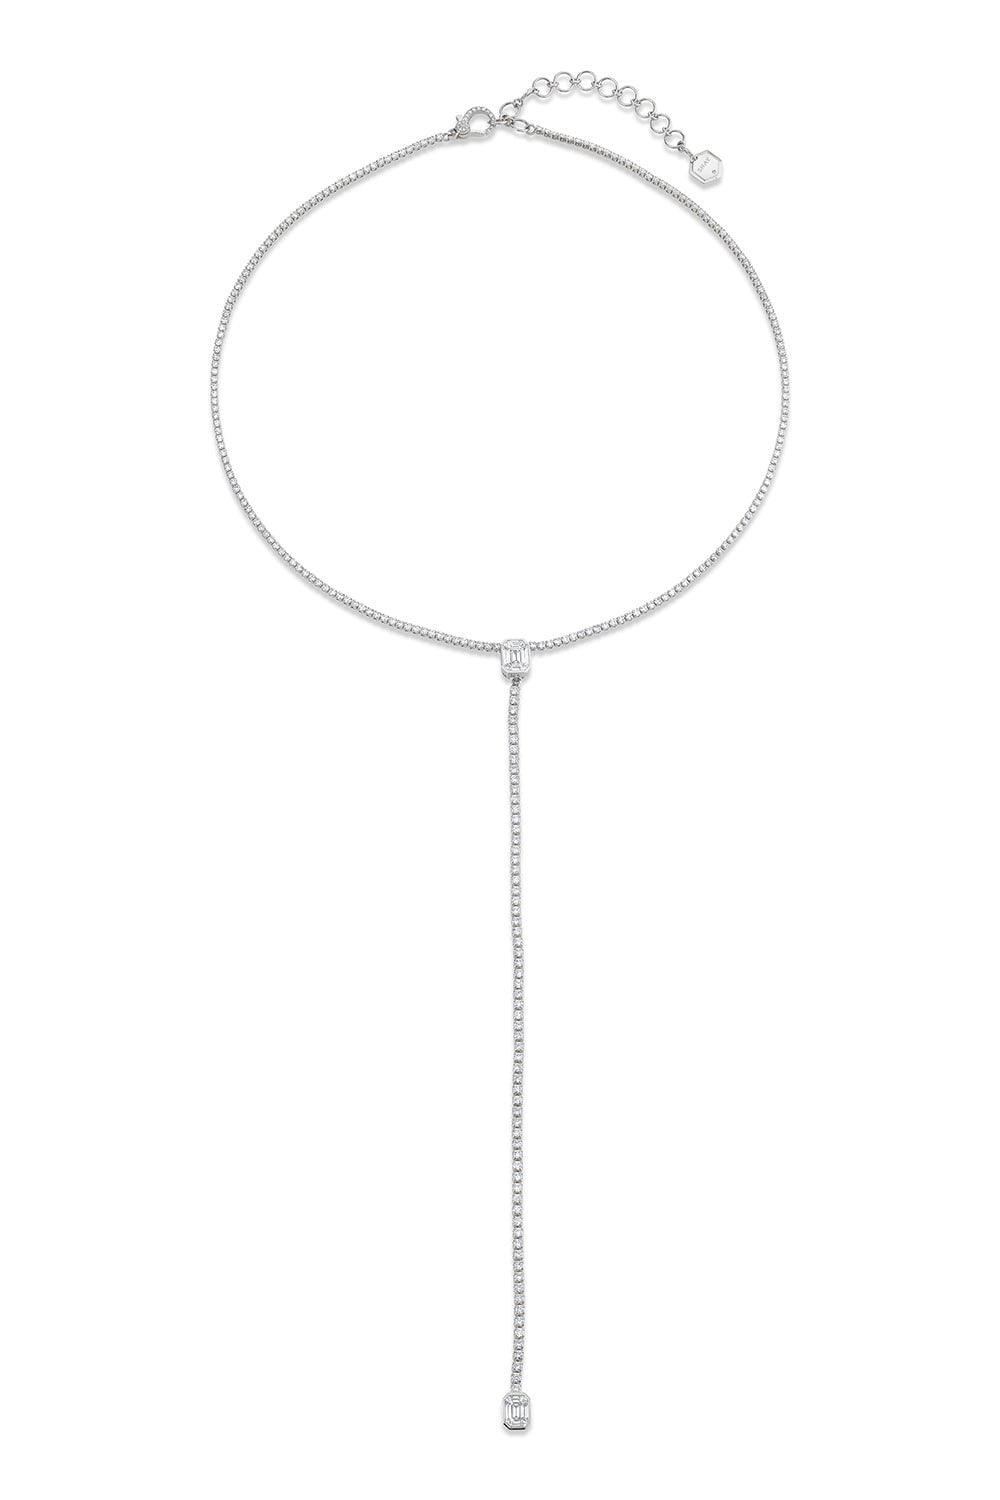 SHAY JEWELRY-Illusion Drop Y Necklace-WHITE GOLD